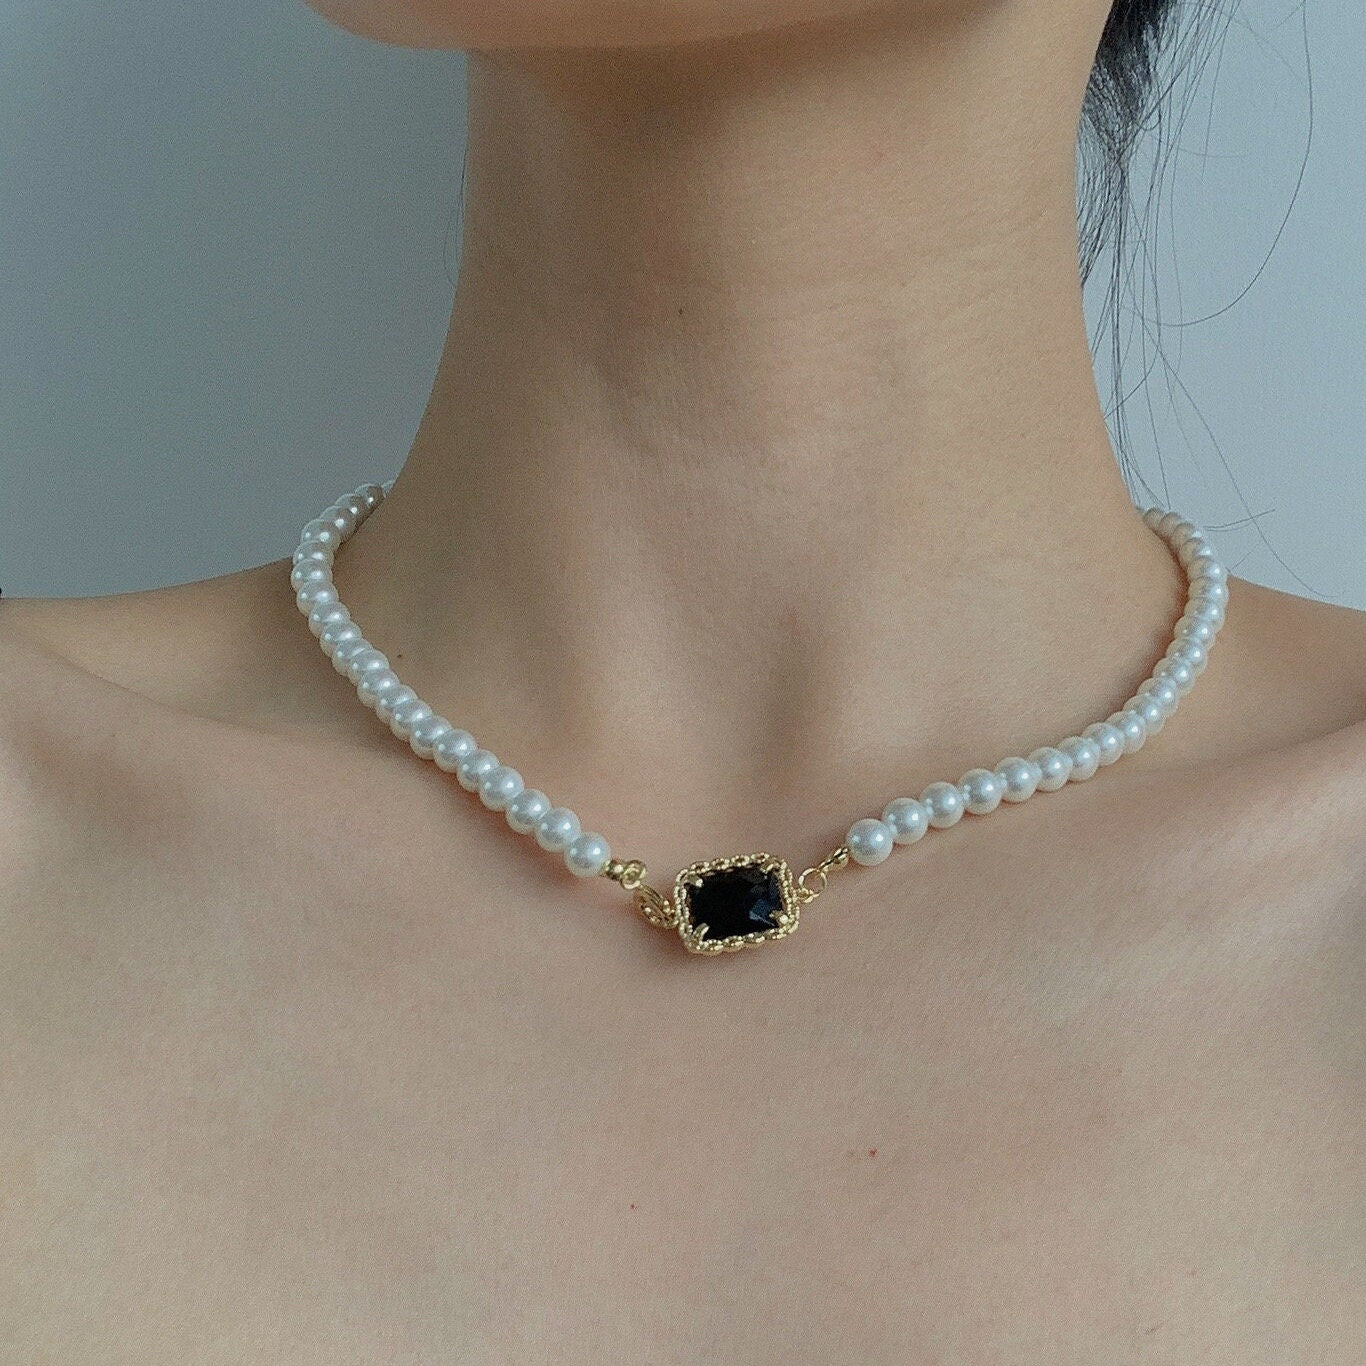 Pearl beaded choker, 14k gold lace necklace, Gothic necklace with black charm, gold lace choker, unique pearl necklace, wedding jewelry gift